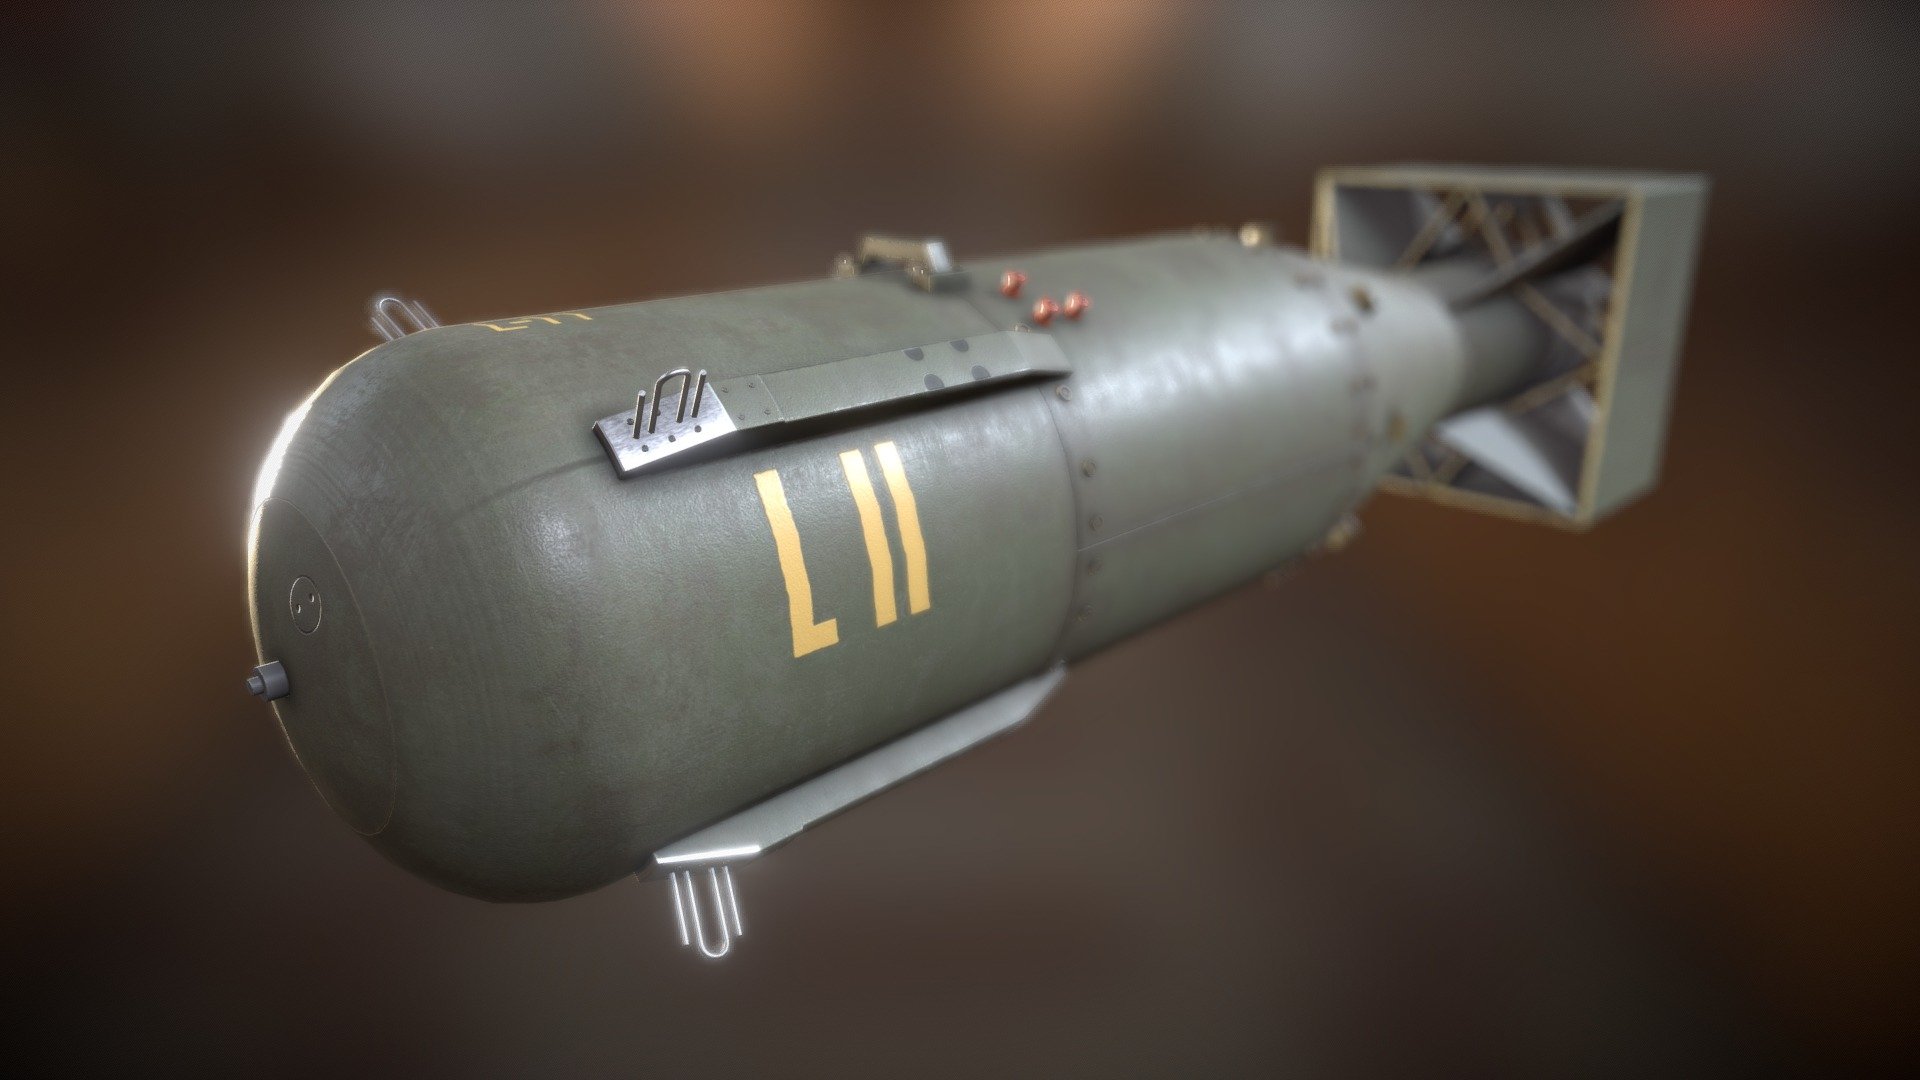 LittleBoy Atomic Bomb



All Textures created in Substance Painter and exported in .PNG PBR formats.

Includes textures for rough/met and gloss/spec workflows.

Logically named objects, materials and textures.

Modelled in Blender 2.90.1

Textured in Substance Painter 2020.2.1.

modelled to real world scales.

Fully and efficiently UV unwrapped.

Game ready.

Tested in Marmoset Viewer, Marmoset Toolbag, EEVEE and Cycles.


Formats included in zipped folder



.Blend (Native)

. FBX

.OBJ (With .MTL Material file)

.DAE 


Textures included in zipped folder.
LittleBoy - 4K




Base Colour   (Metallic Colour)

Diffuse (Metallic Black)

Roughness

Glossiness

Specular

Metallic

Normal -  (OpenGL Unity standard)

Normal -  (DirectX Unreal Standard)
 - Little Boy Atomic Bomb - Buy Royalty Free 3D model by PBR3D 3d model